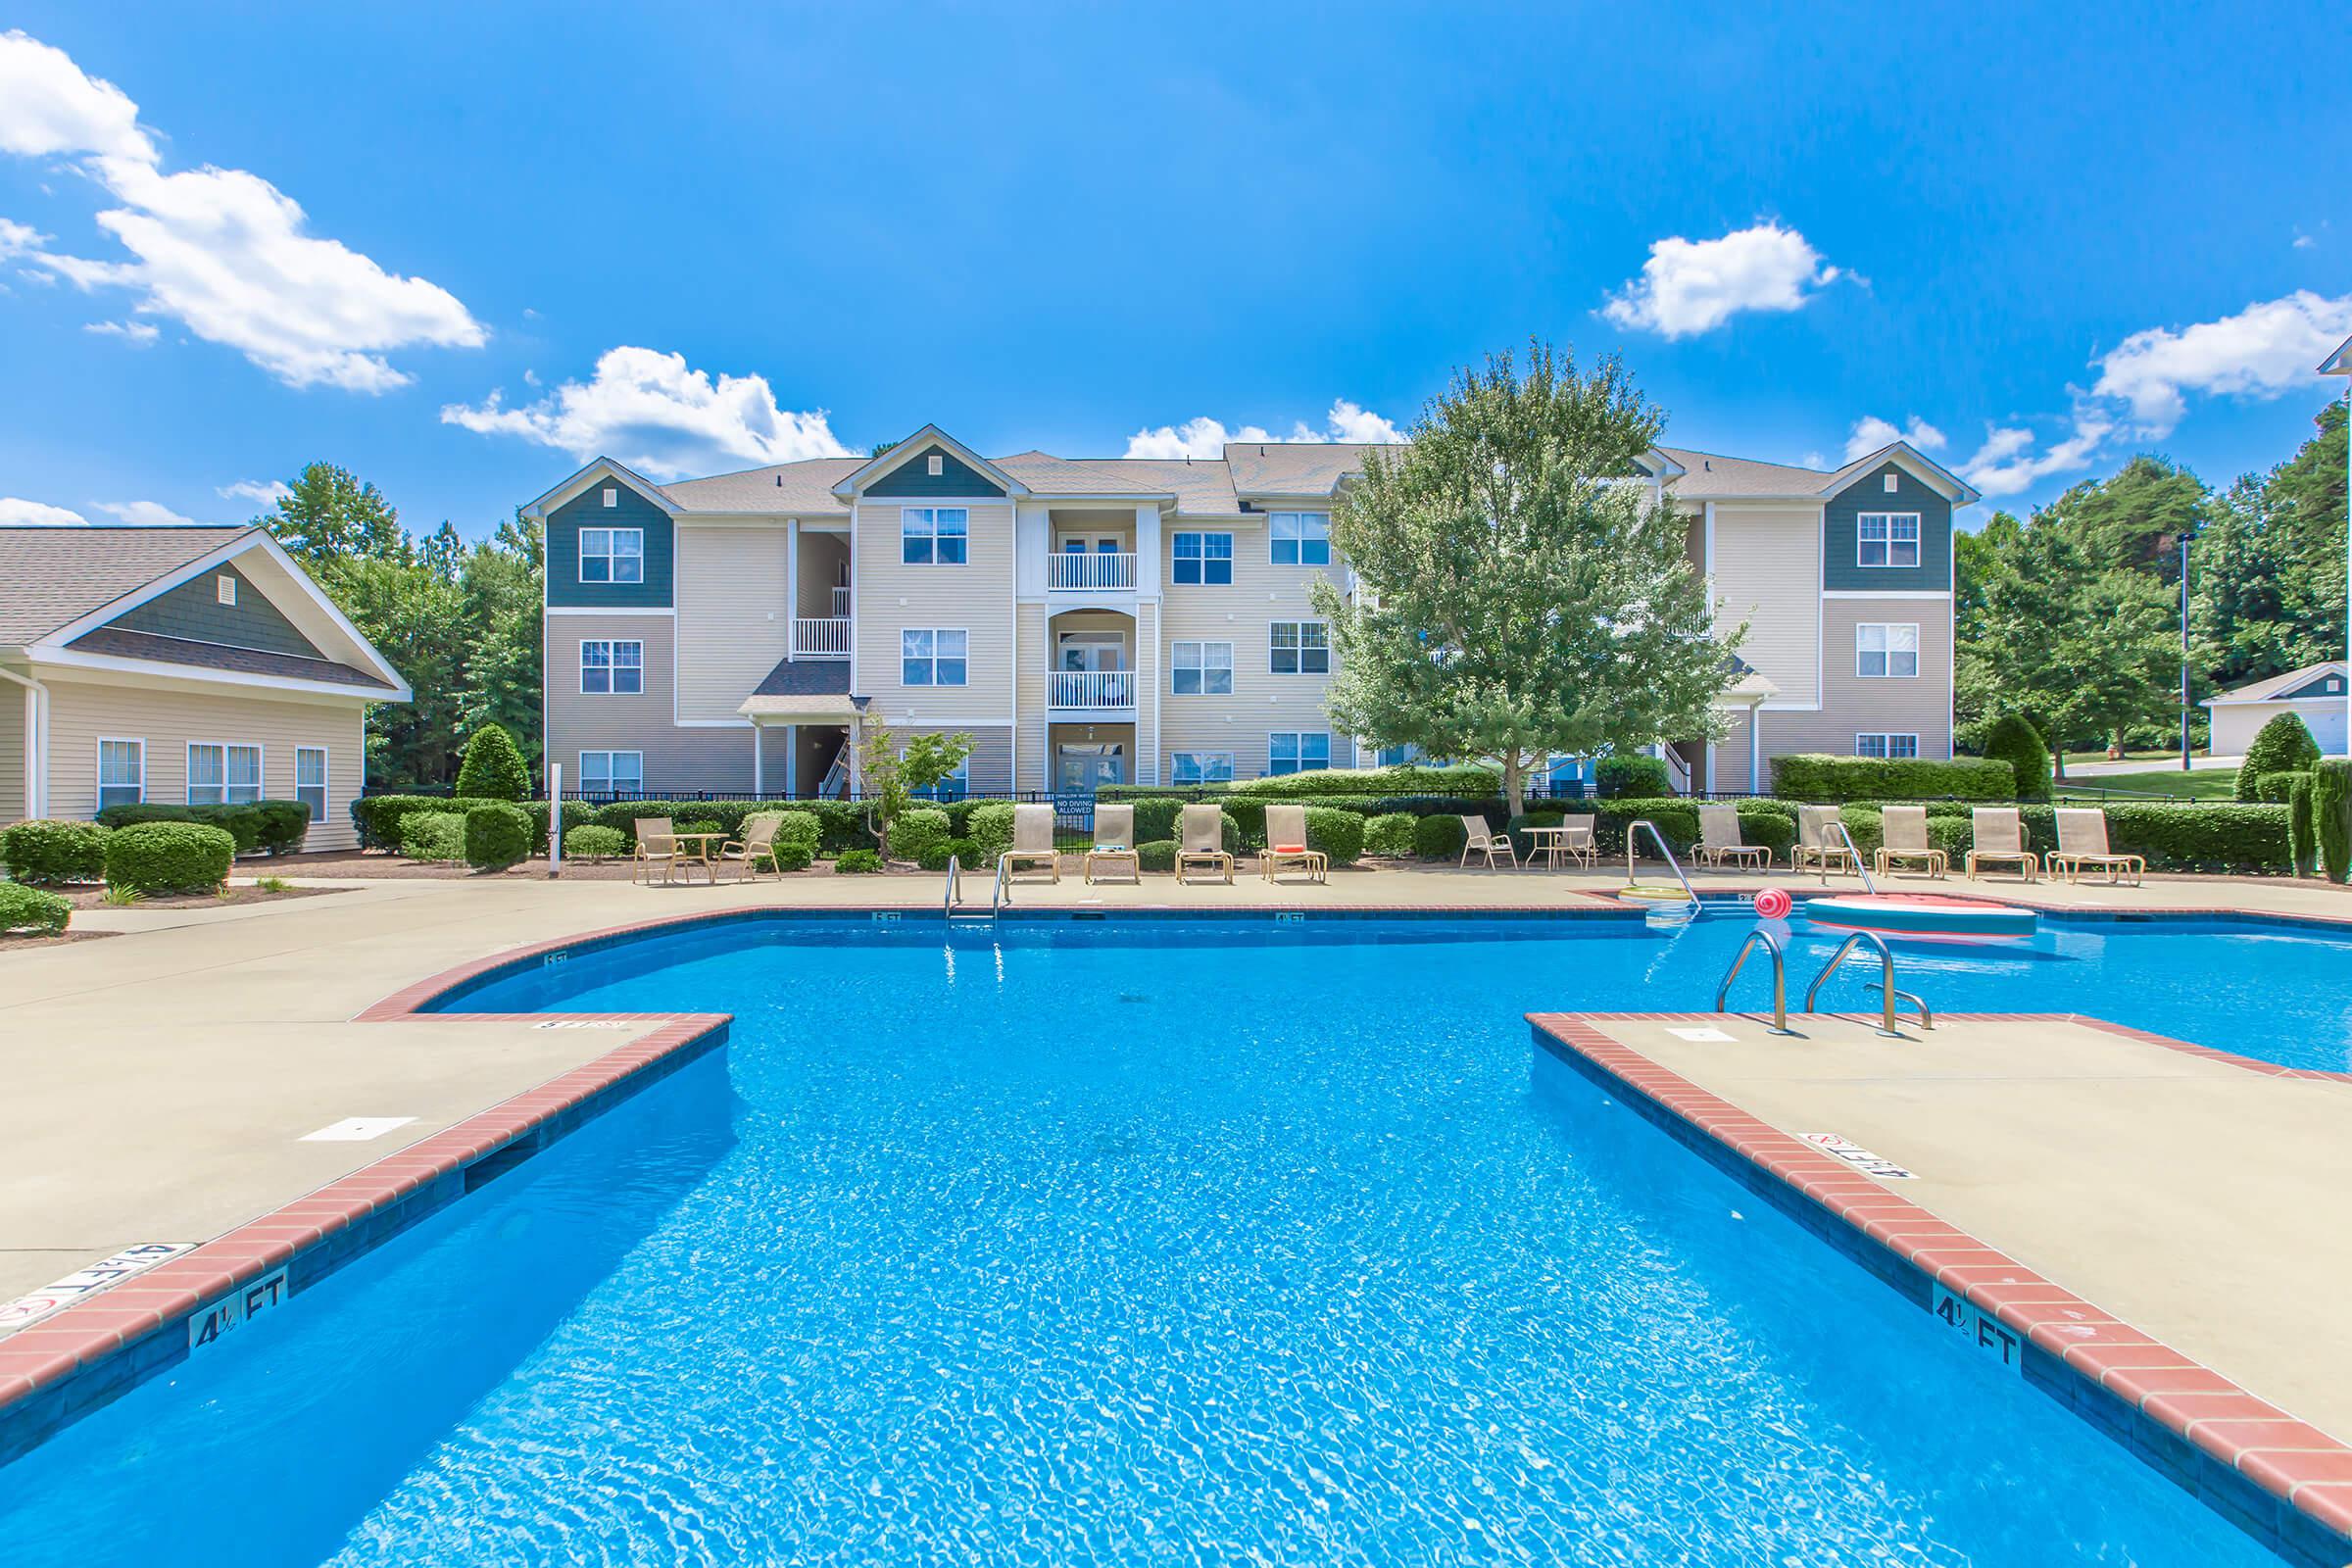 Soak up the sun by the shimmering swimming pool at Whisper Creek in Rock Hill, SC.